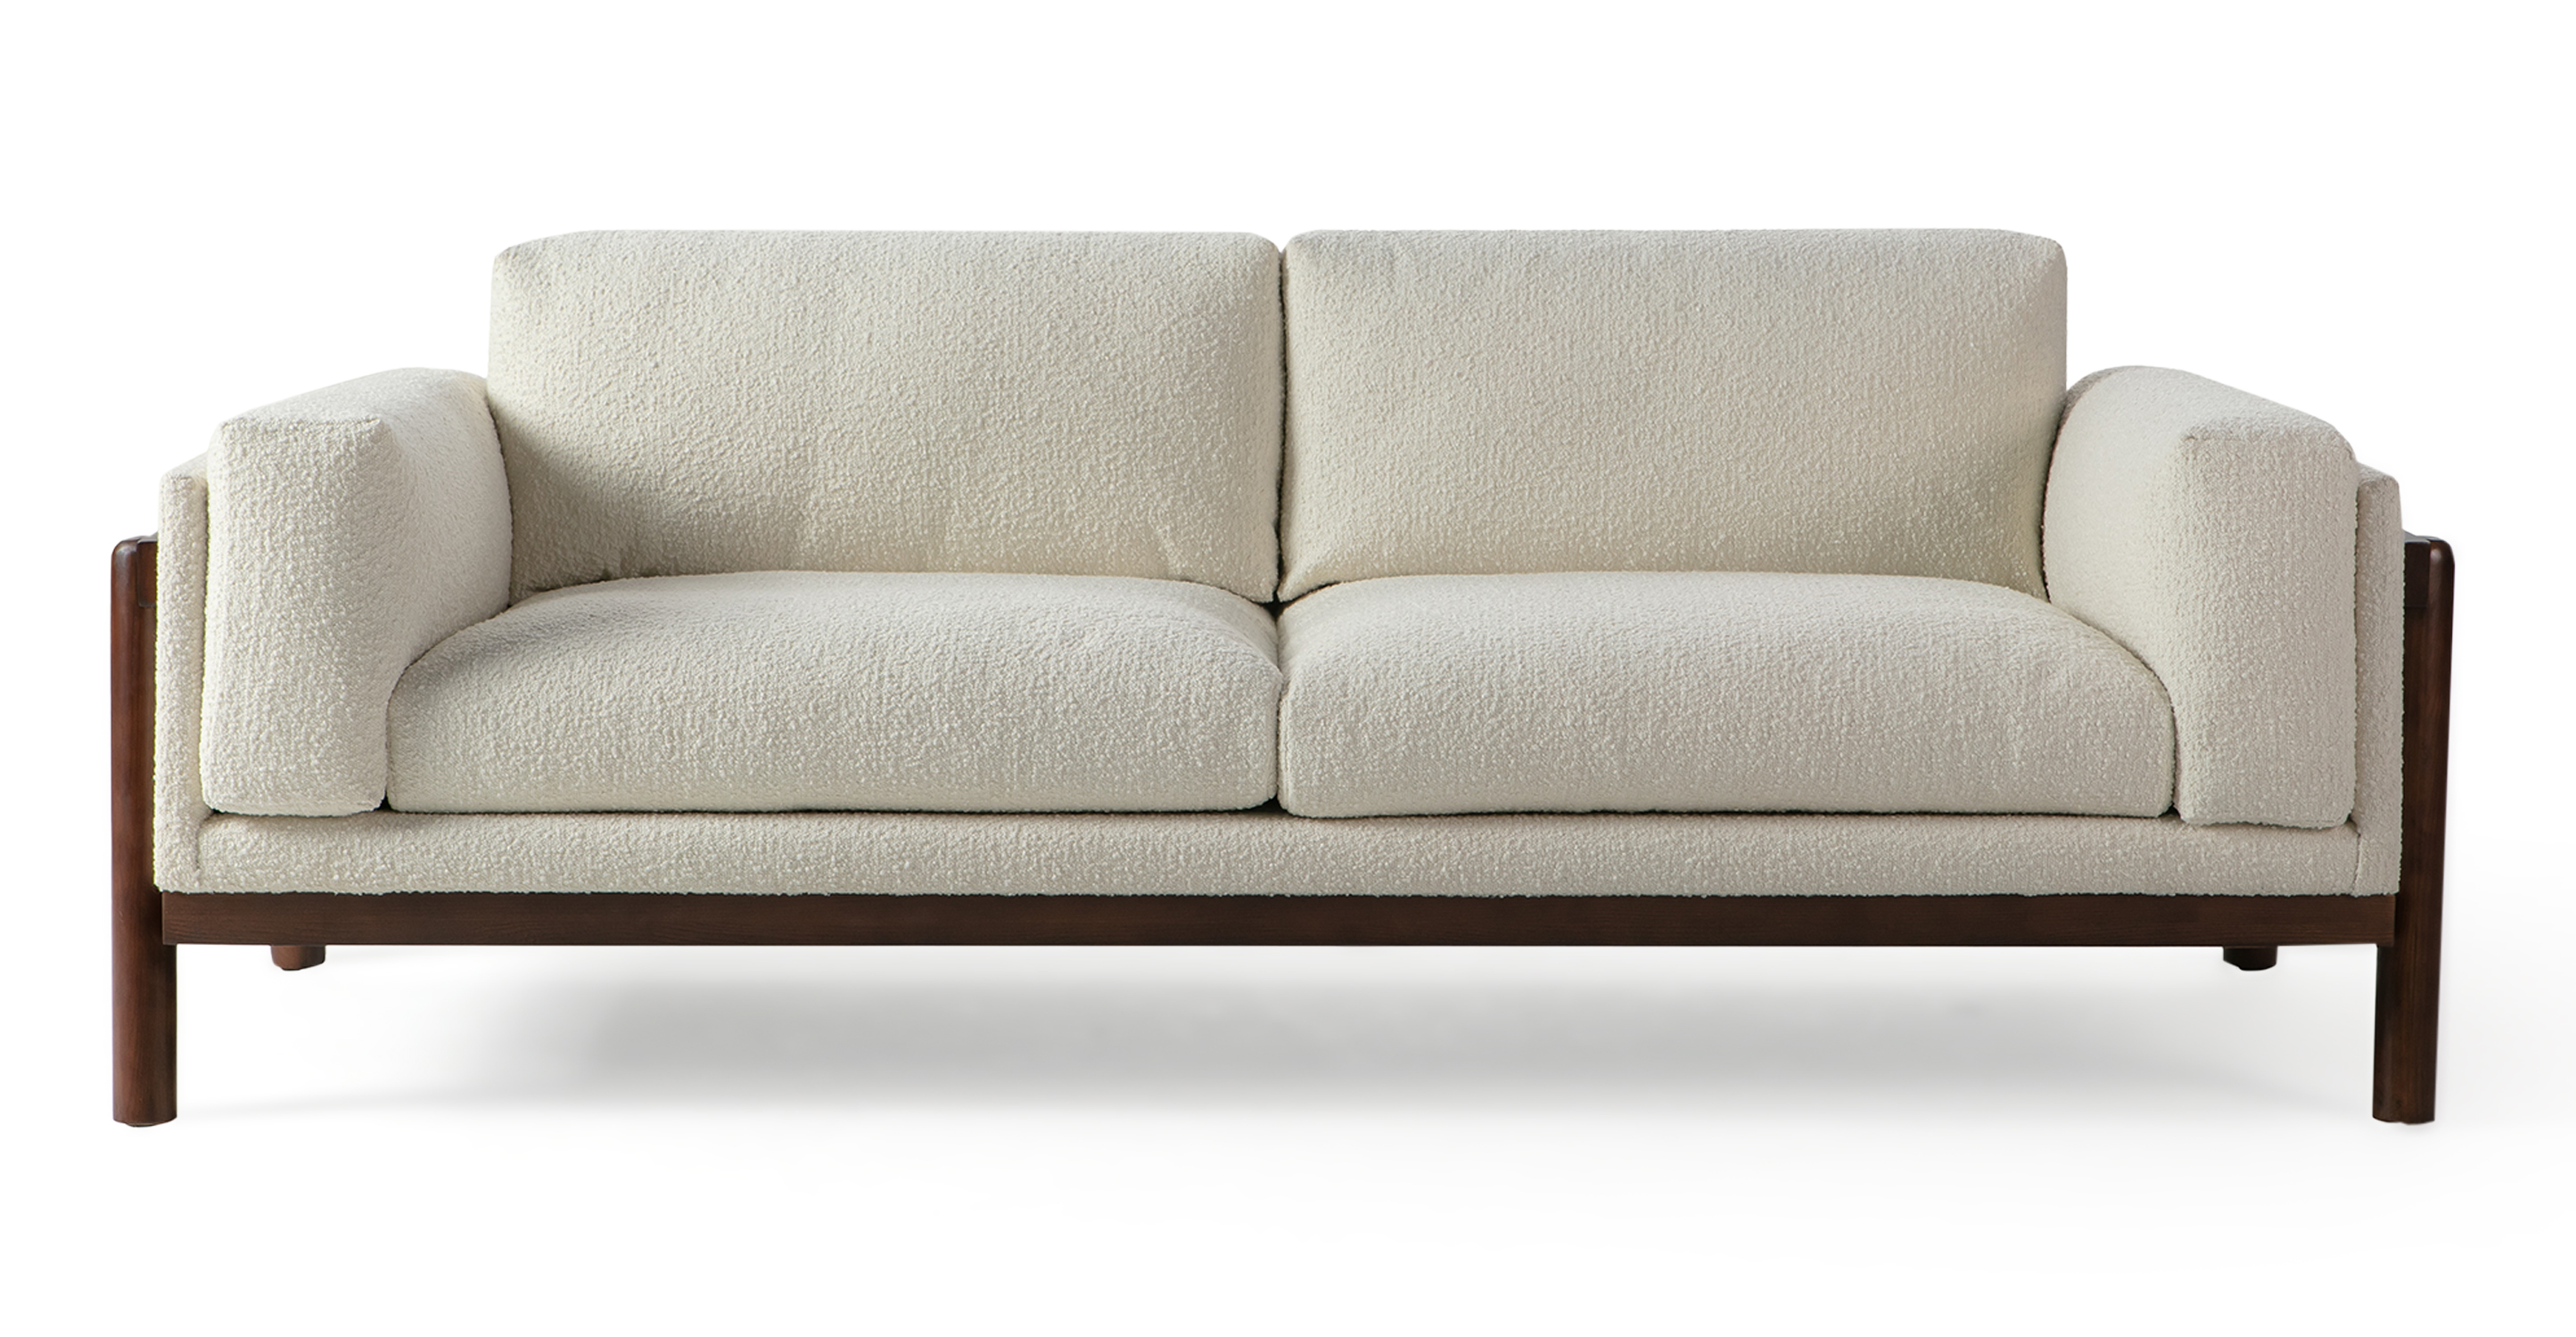 Cream Nordic has a raised exposed walnut wood frame and an inner base, arm, and back lining in leather. The arms, 2 seat cushions, and 2 back cushions are in fabric. The look is comfortable, relaxed, and modernly Scandinavian.